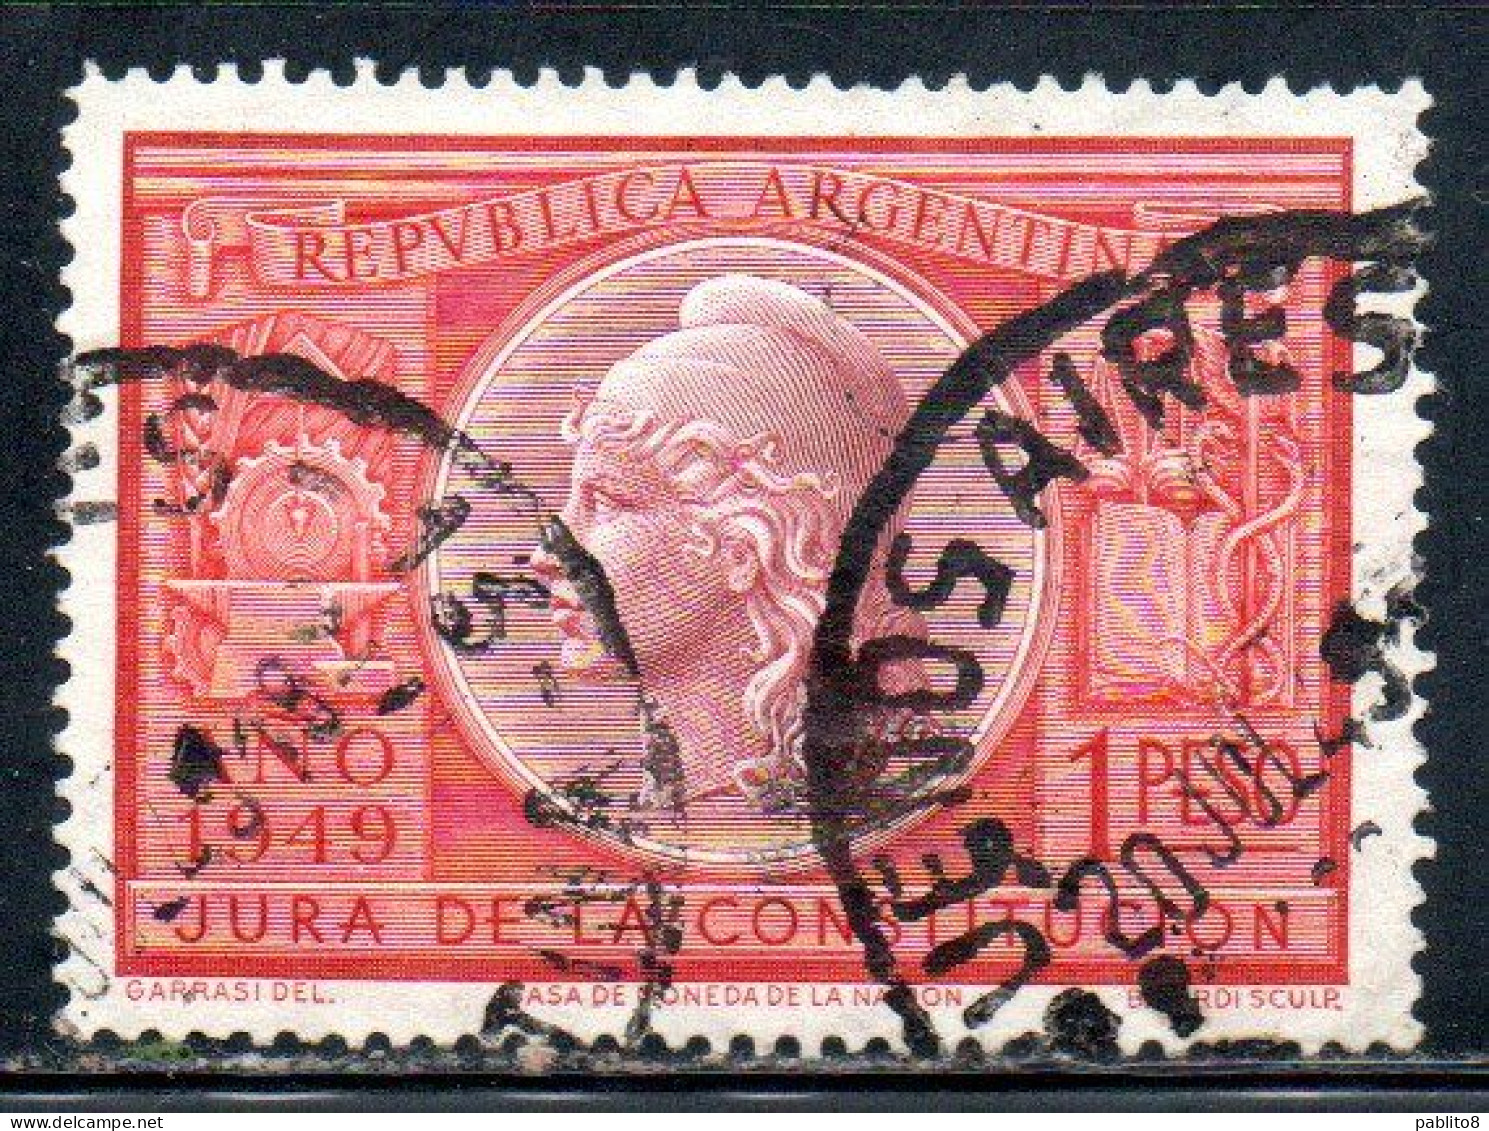 ARGENTINA 1949 RATIFICATION OF THE CONSTITUTION 1p USED USADO OBLITERE' - Used Stamps